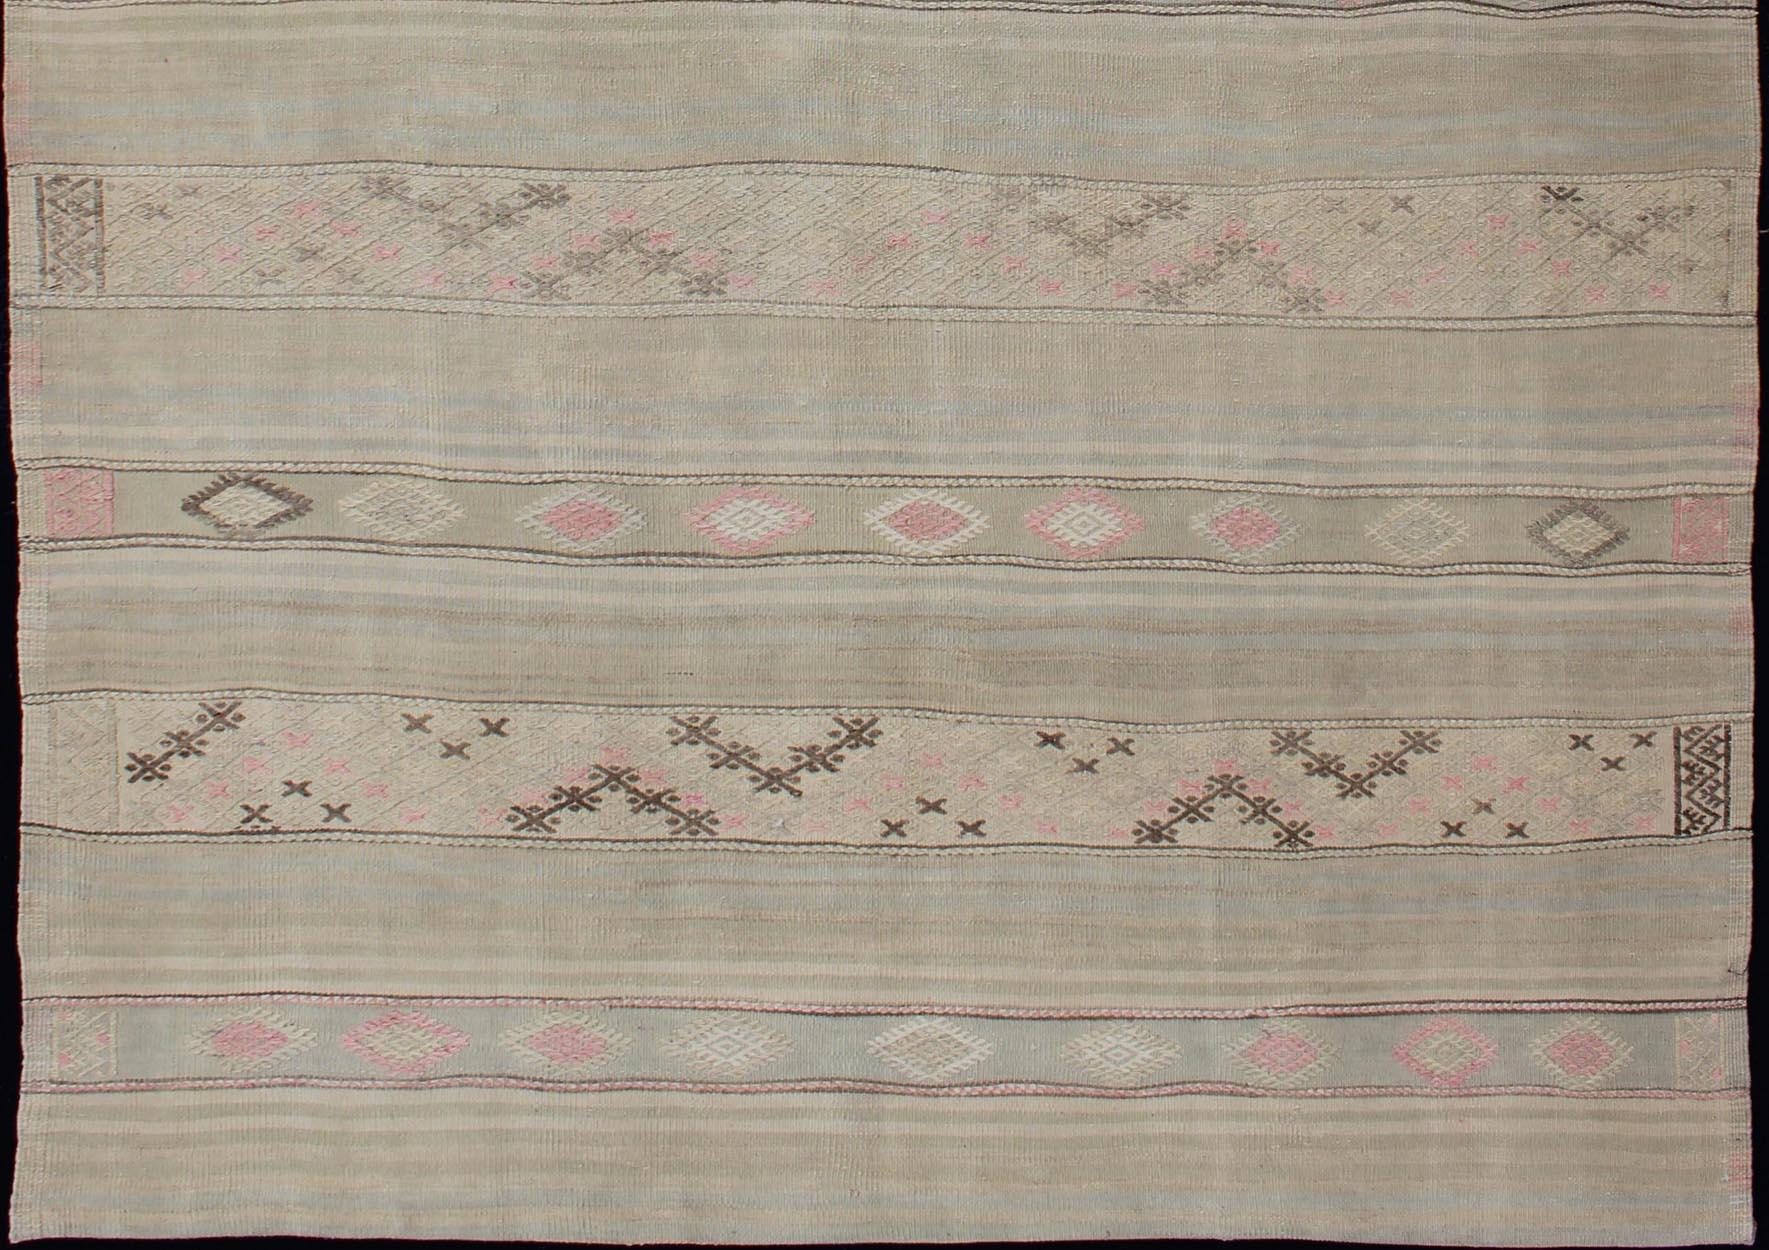 Hand-Woven Vintage Turkish Flat-Weave Striped Kilim in Taupe, Pink, and Light Brown For Sale